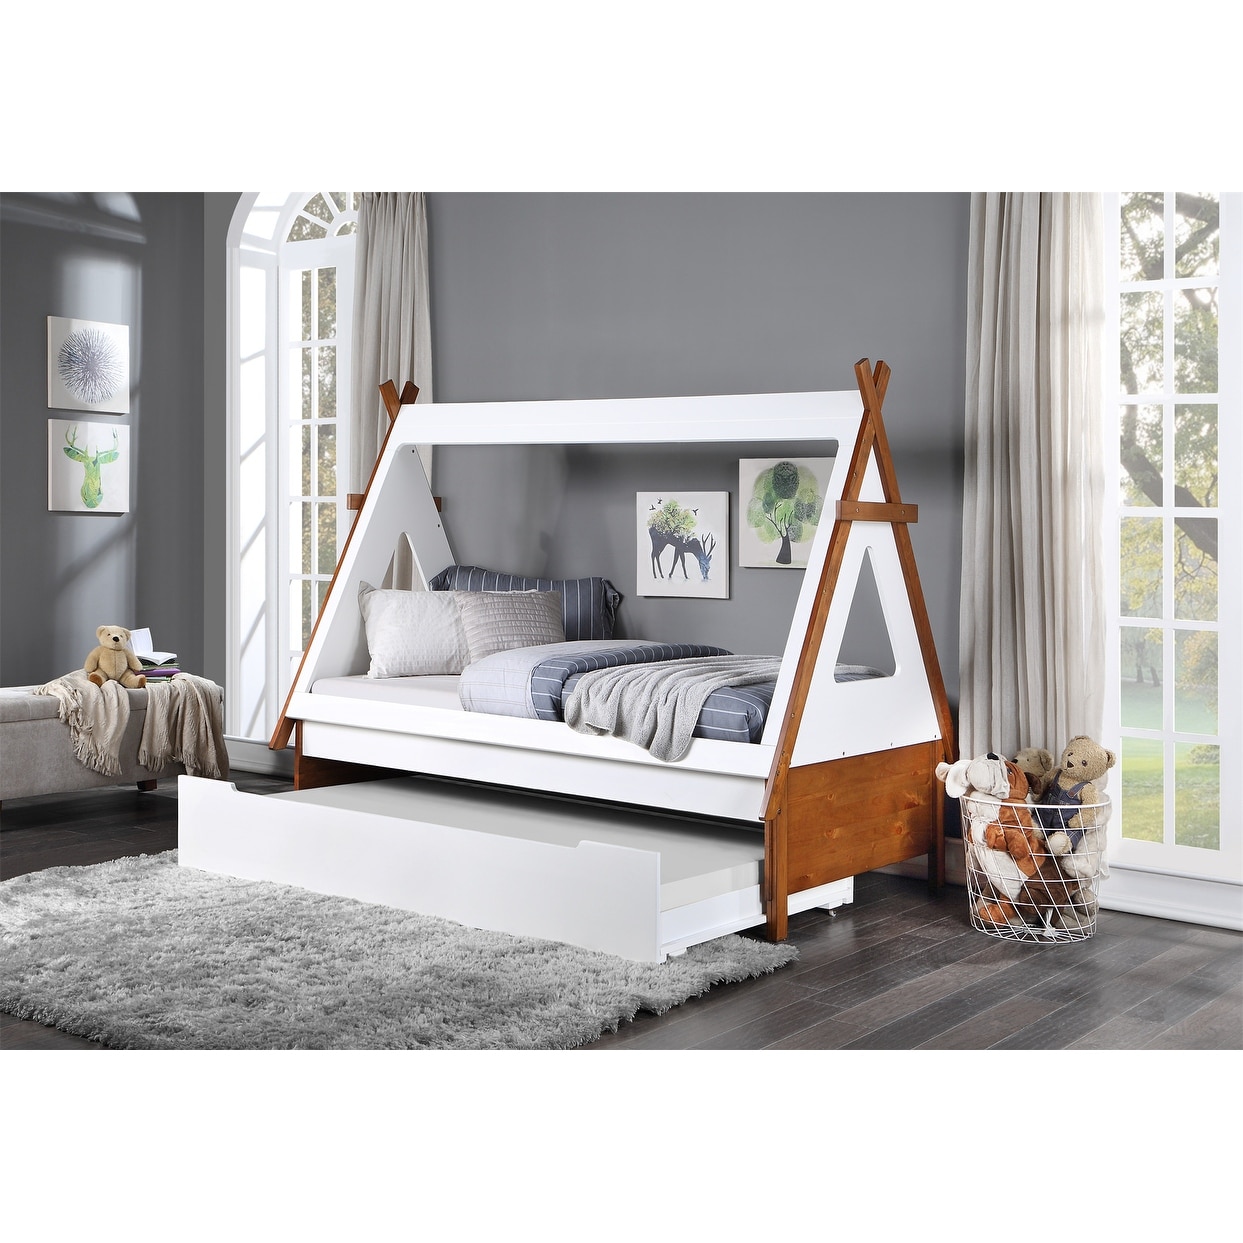 Tent Cover Accessory for Casita Kids Wood Floor Twin Bed - Grey